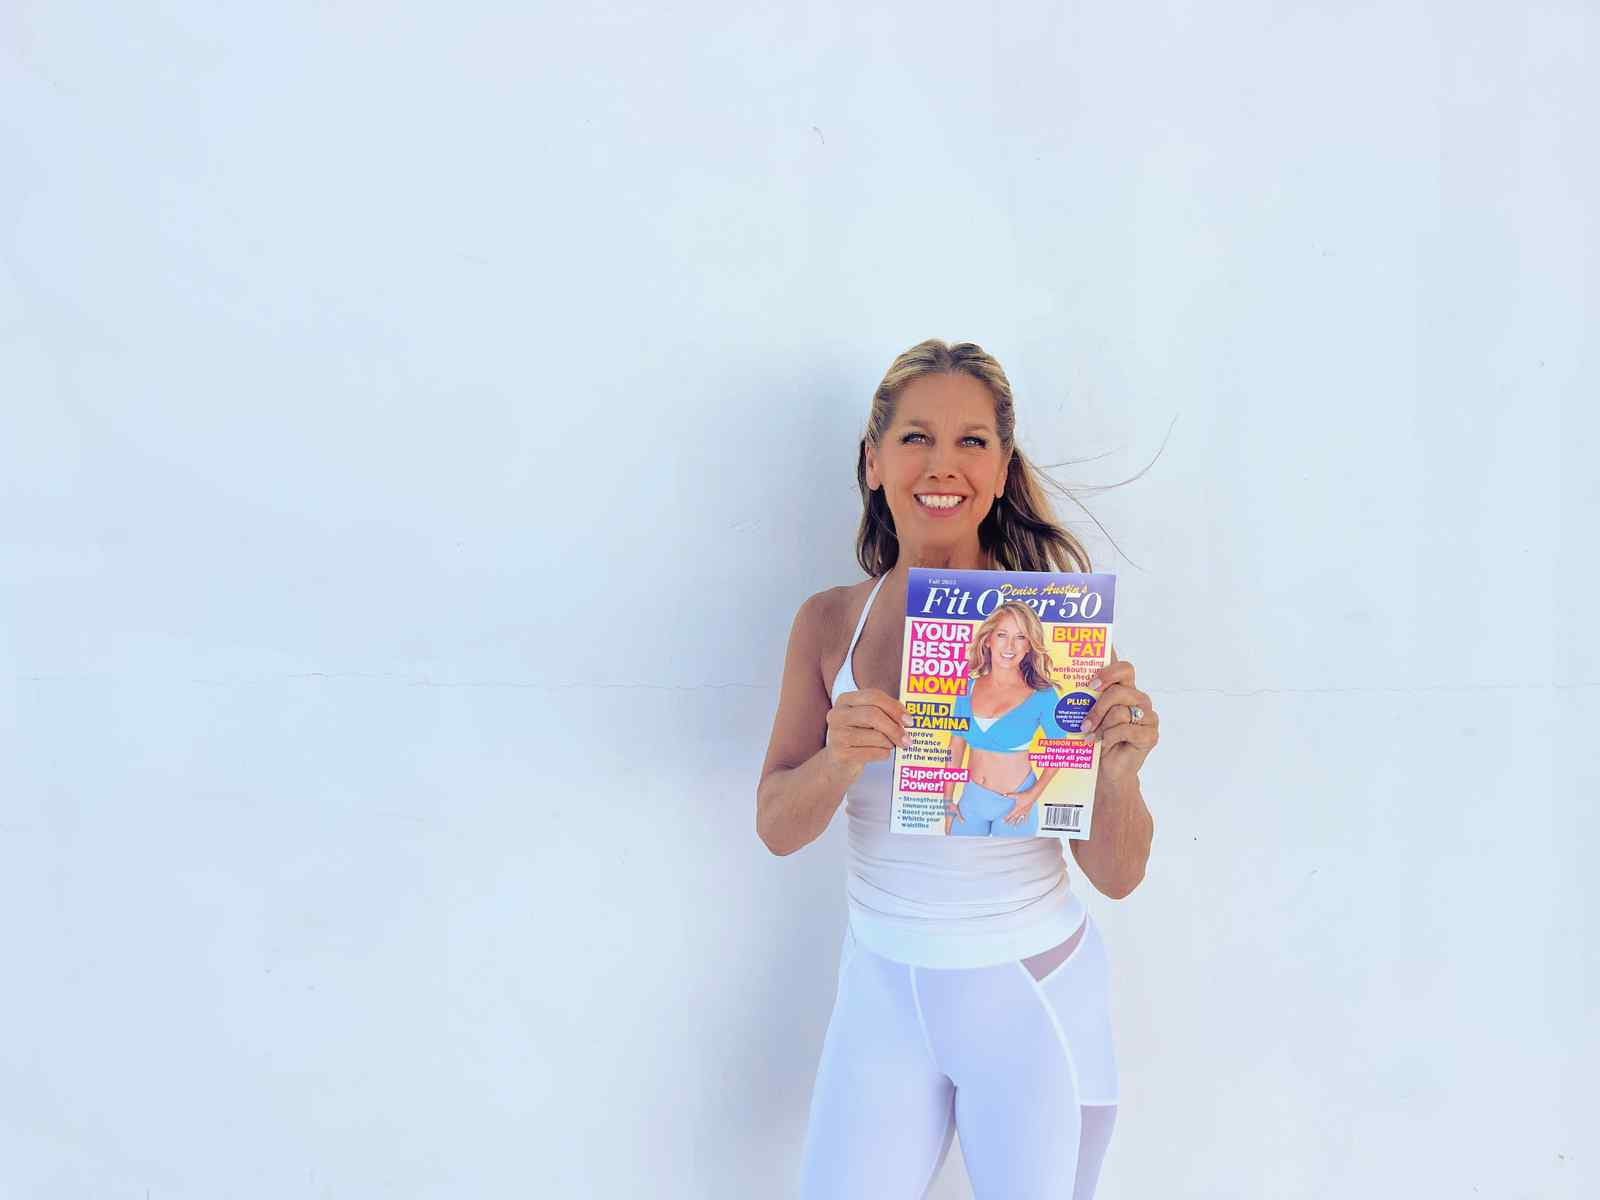 Fit Over 50: Your Best Body Now is ON STANDS!